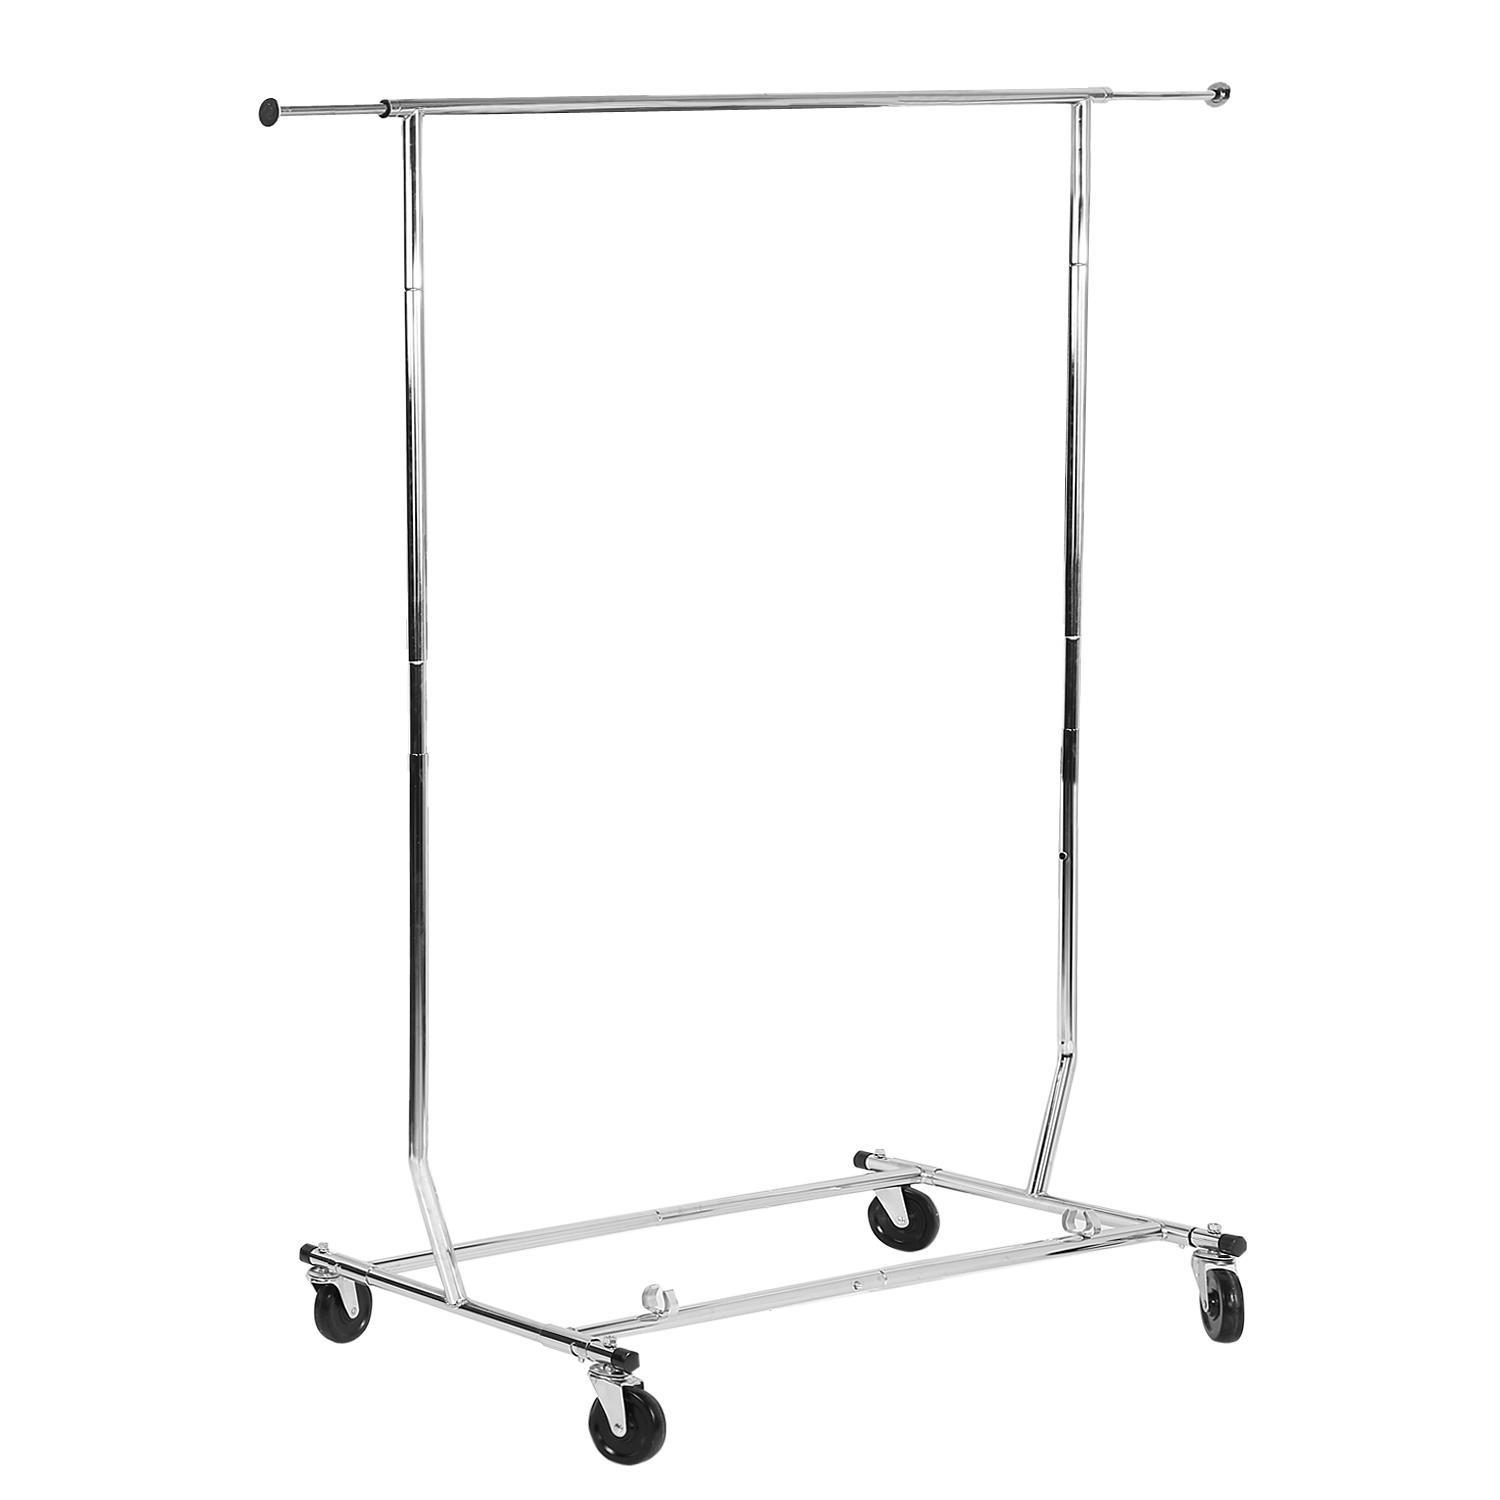 Whitmor Adjustable Rolling Garment Rack - Collapsible - Chrome - 22" x 51" x 71.25" - image 2 of 7